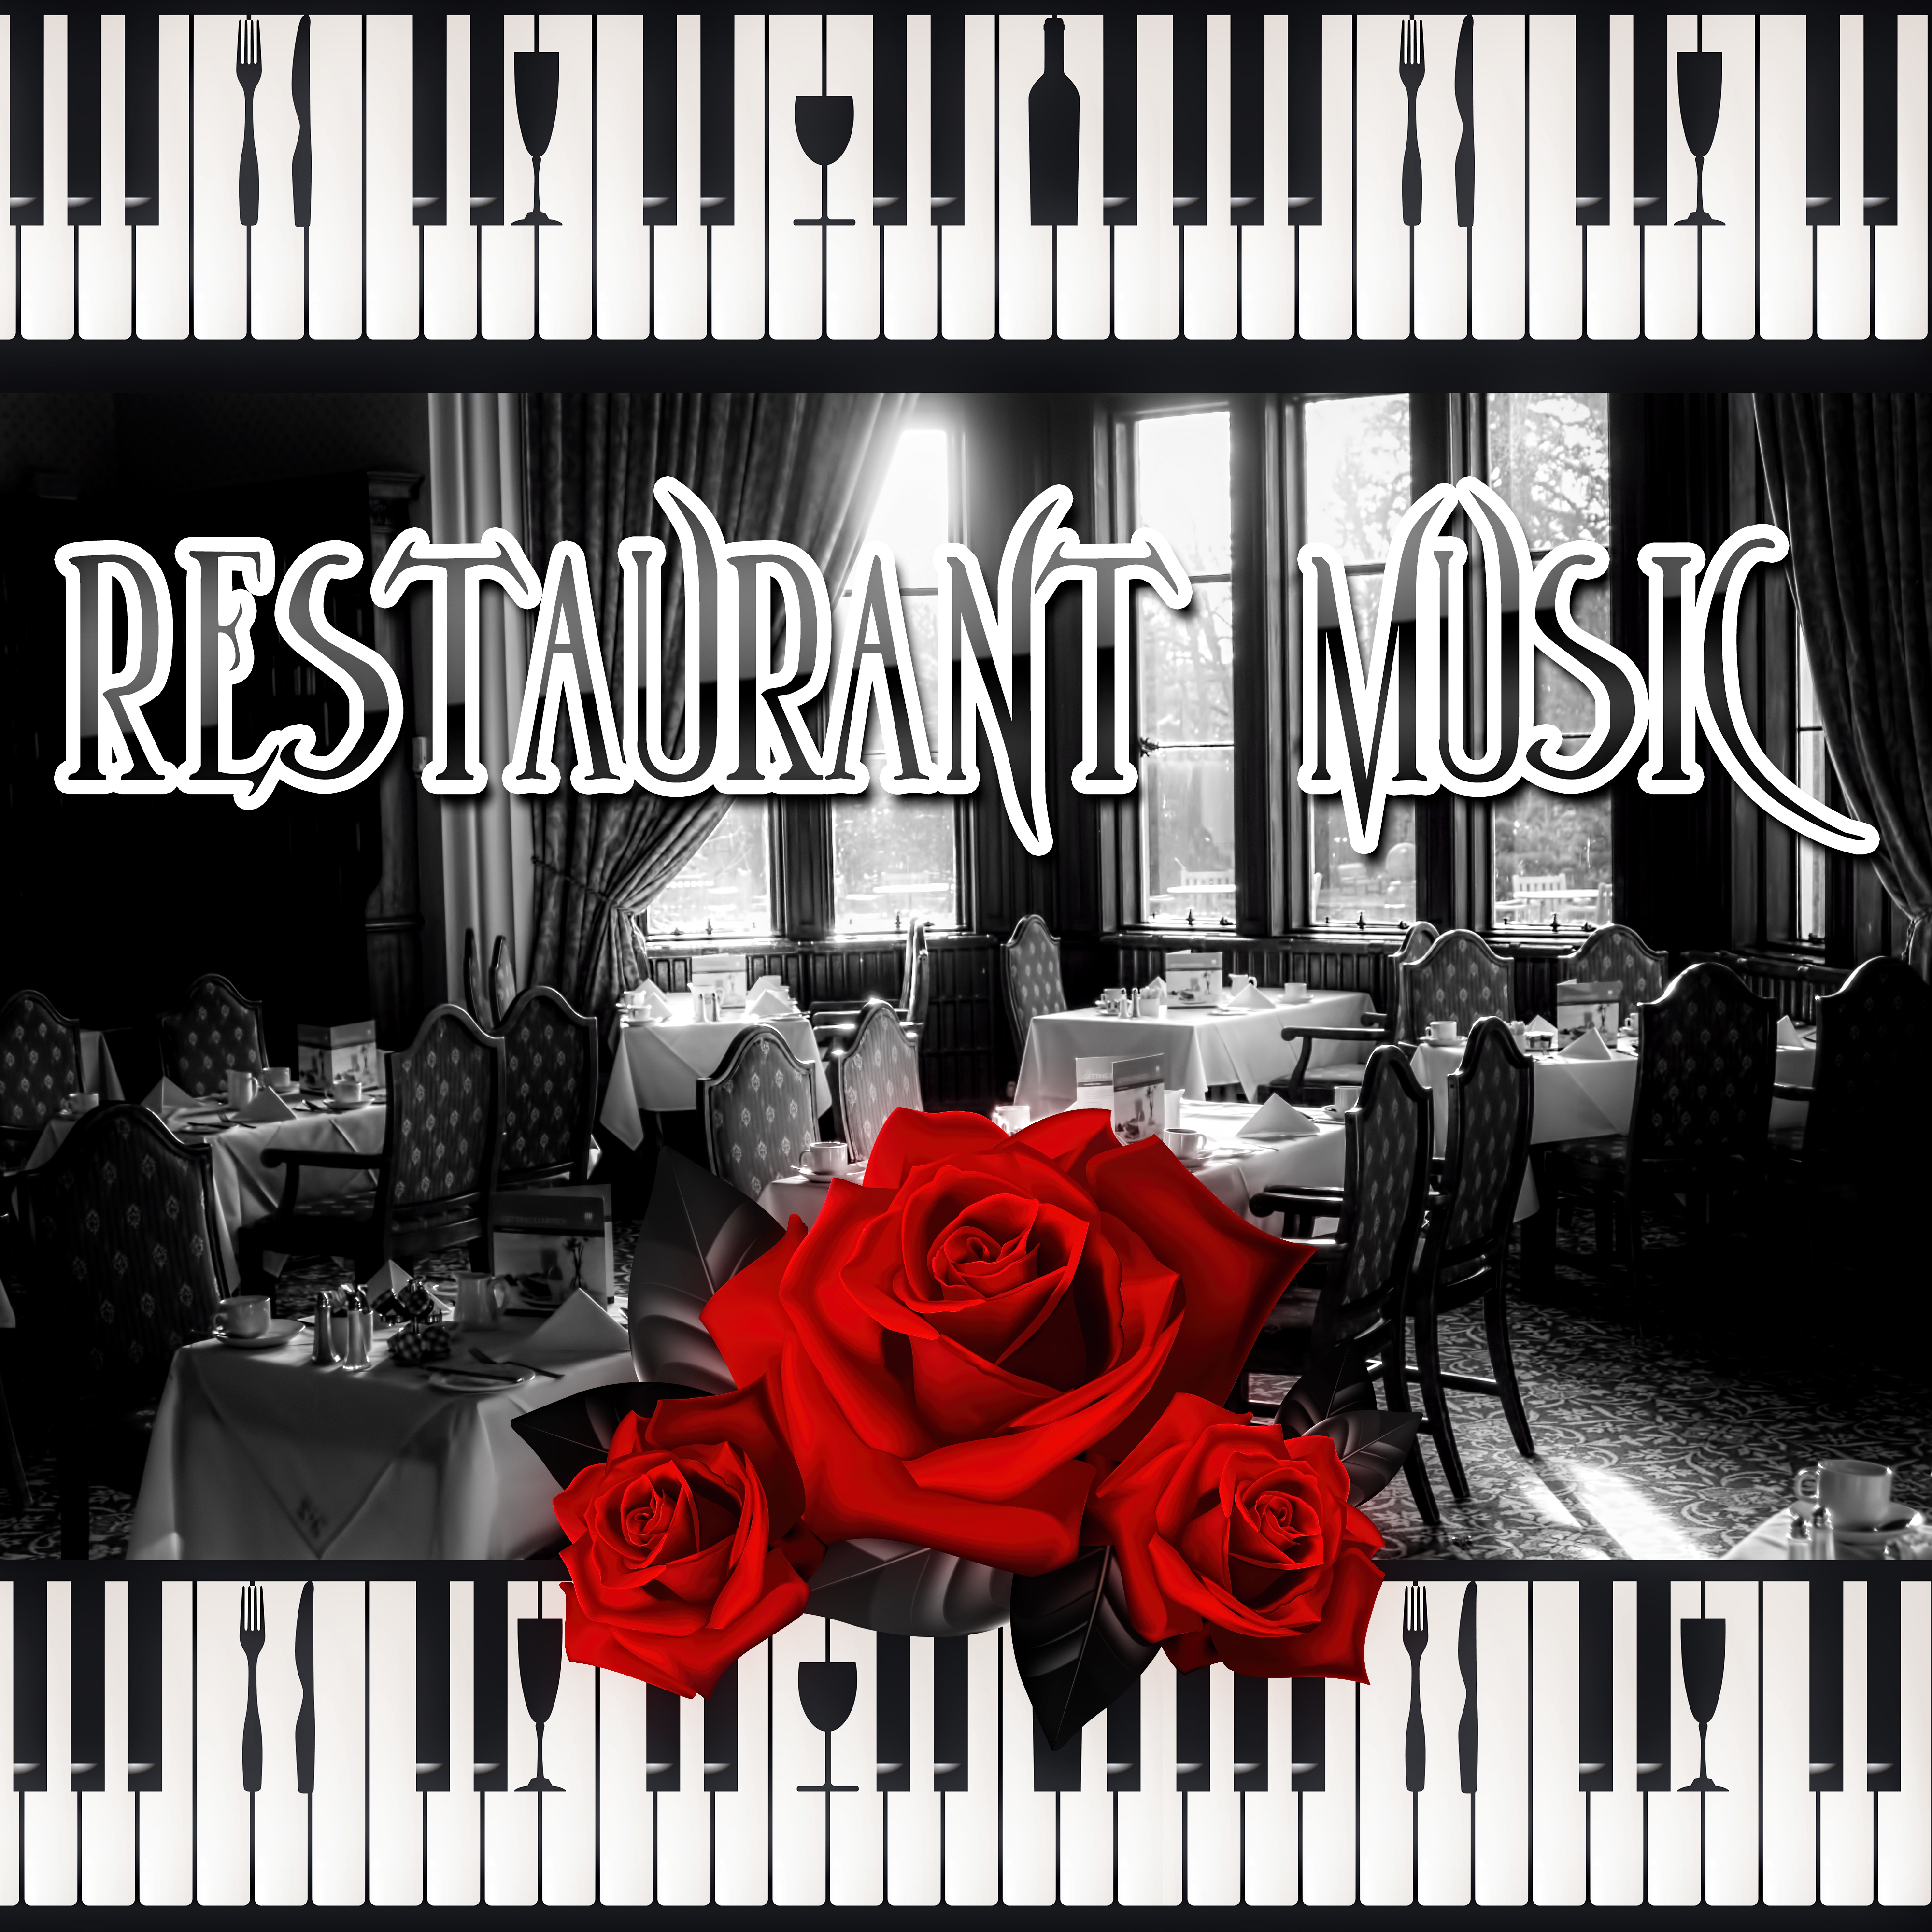 Restaurant Music – Romantic Music, Background Piano, Shades of Love, **** Songs, Happy Hour, Intimate Moments, Coktail Piano Bar, Dinner Party